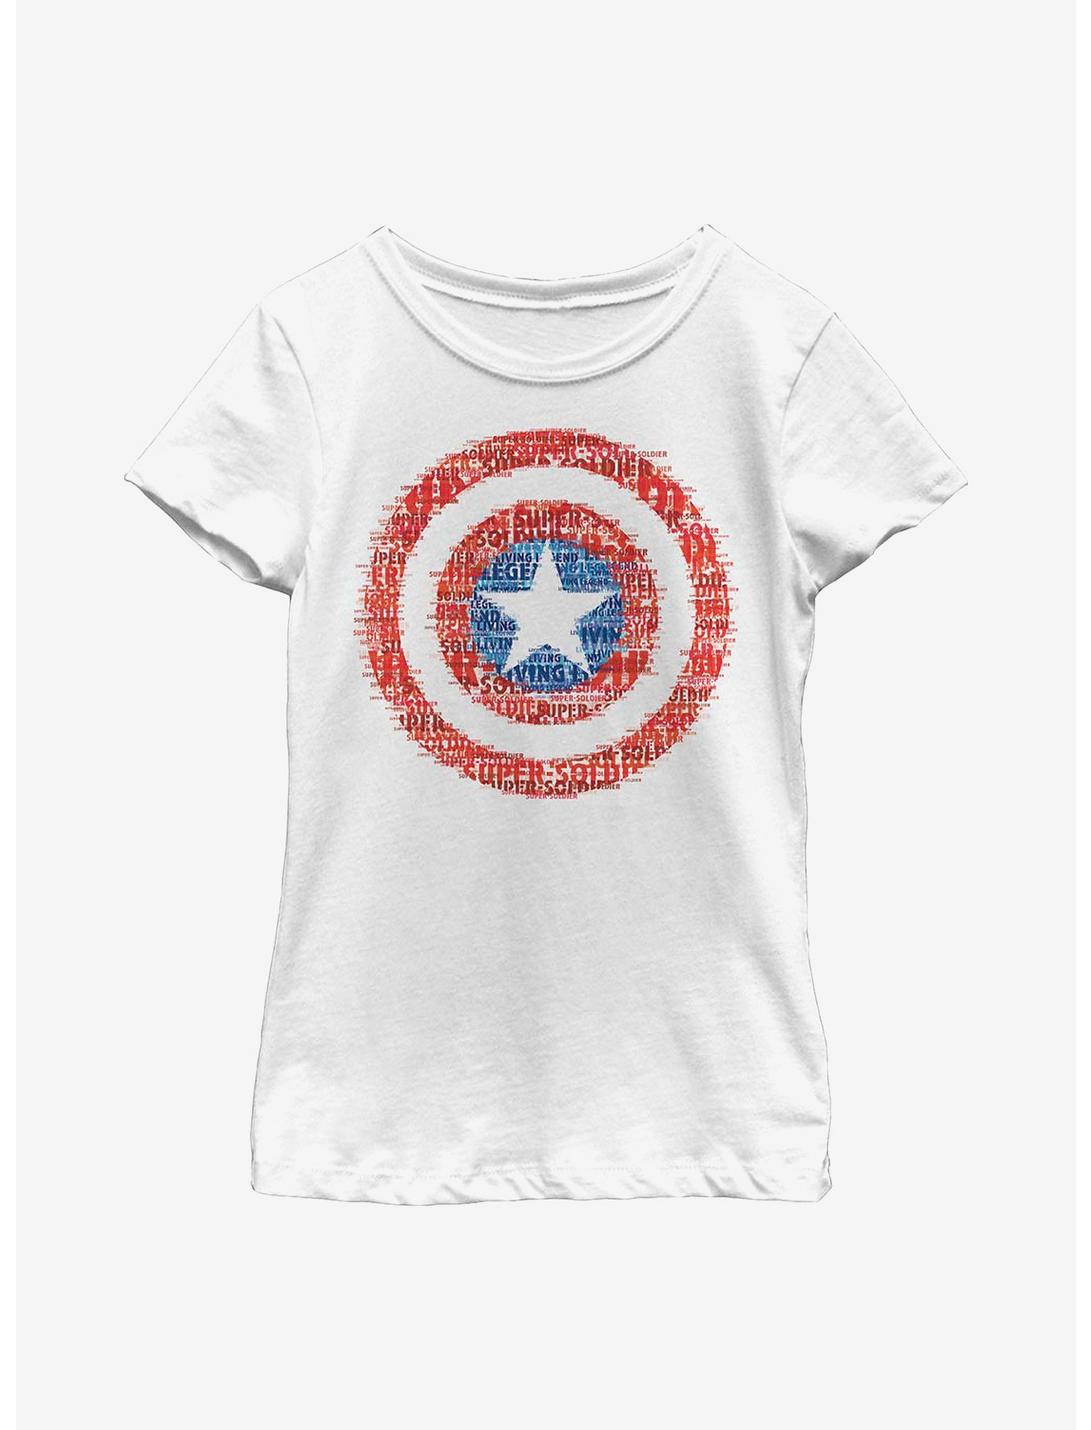 Marvel Captain America Super Soldier Youth Girls T-Shirt, WHITE, hi-res